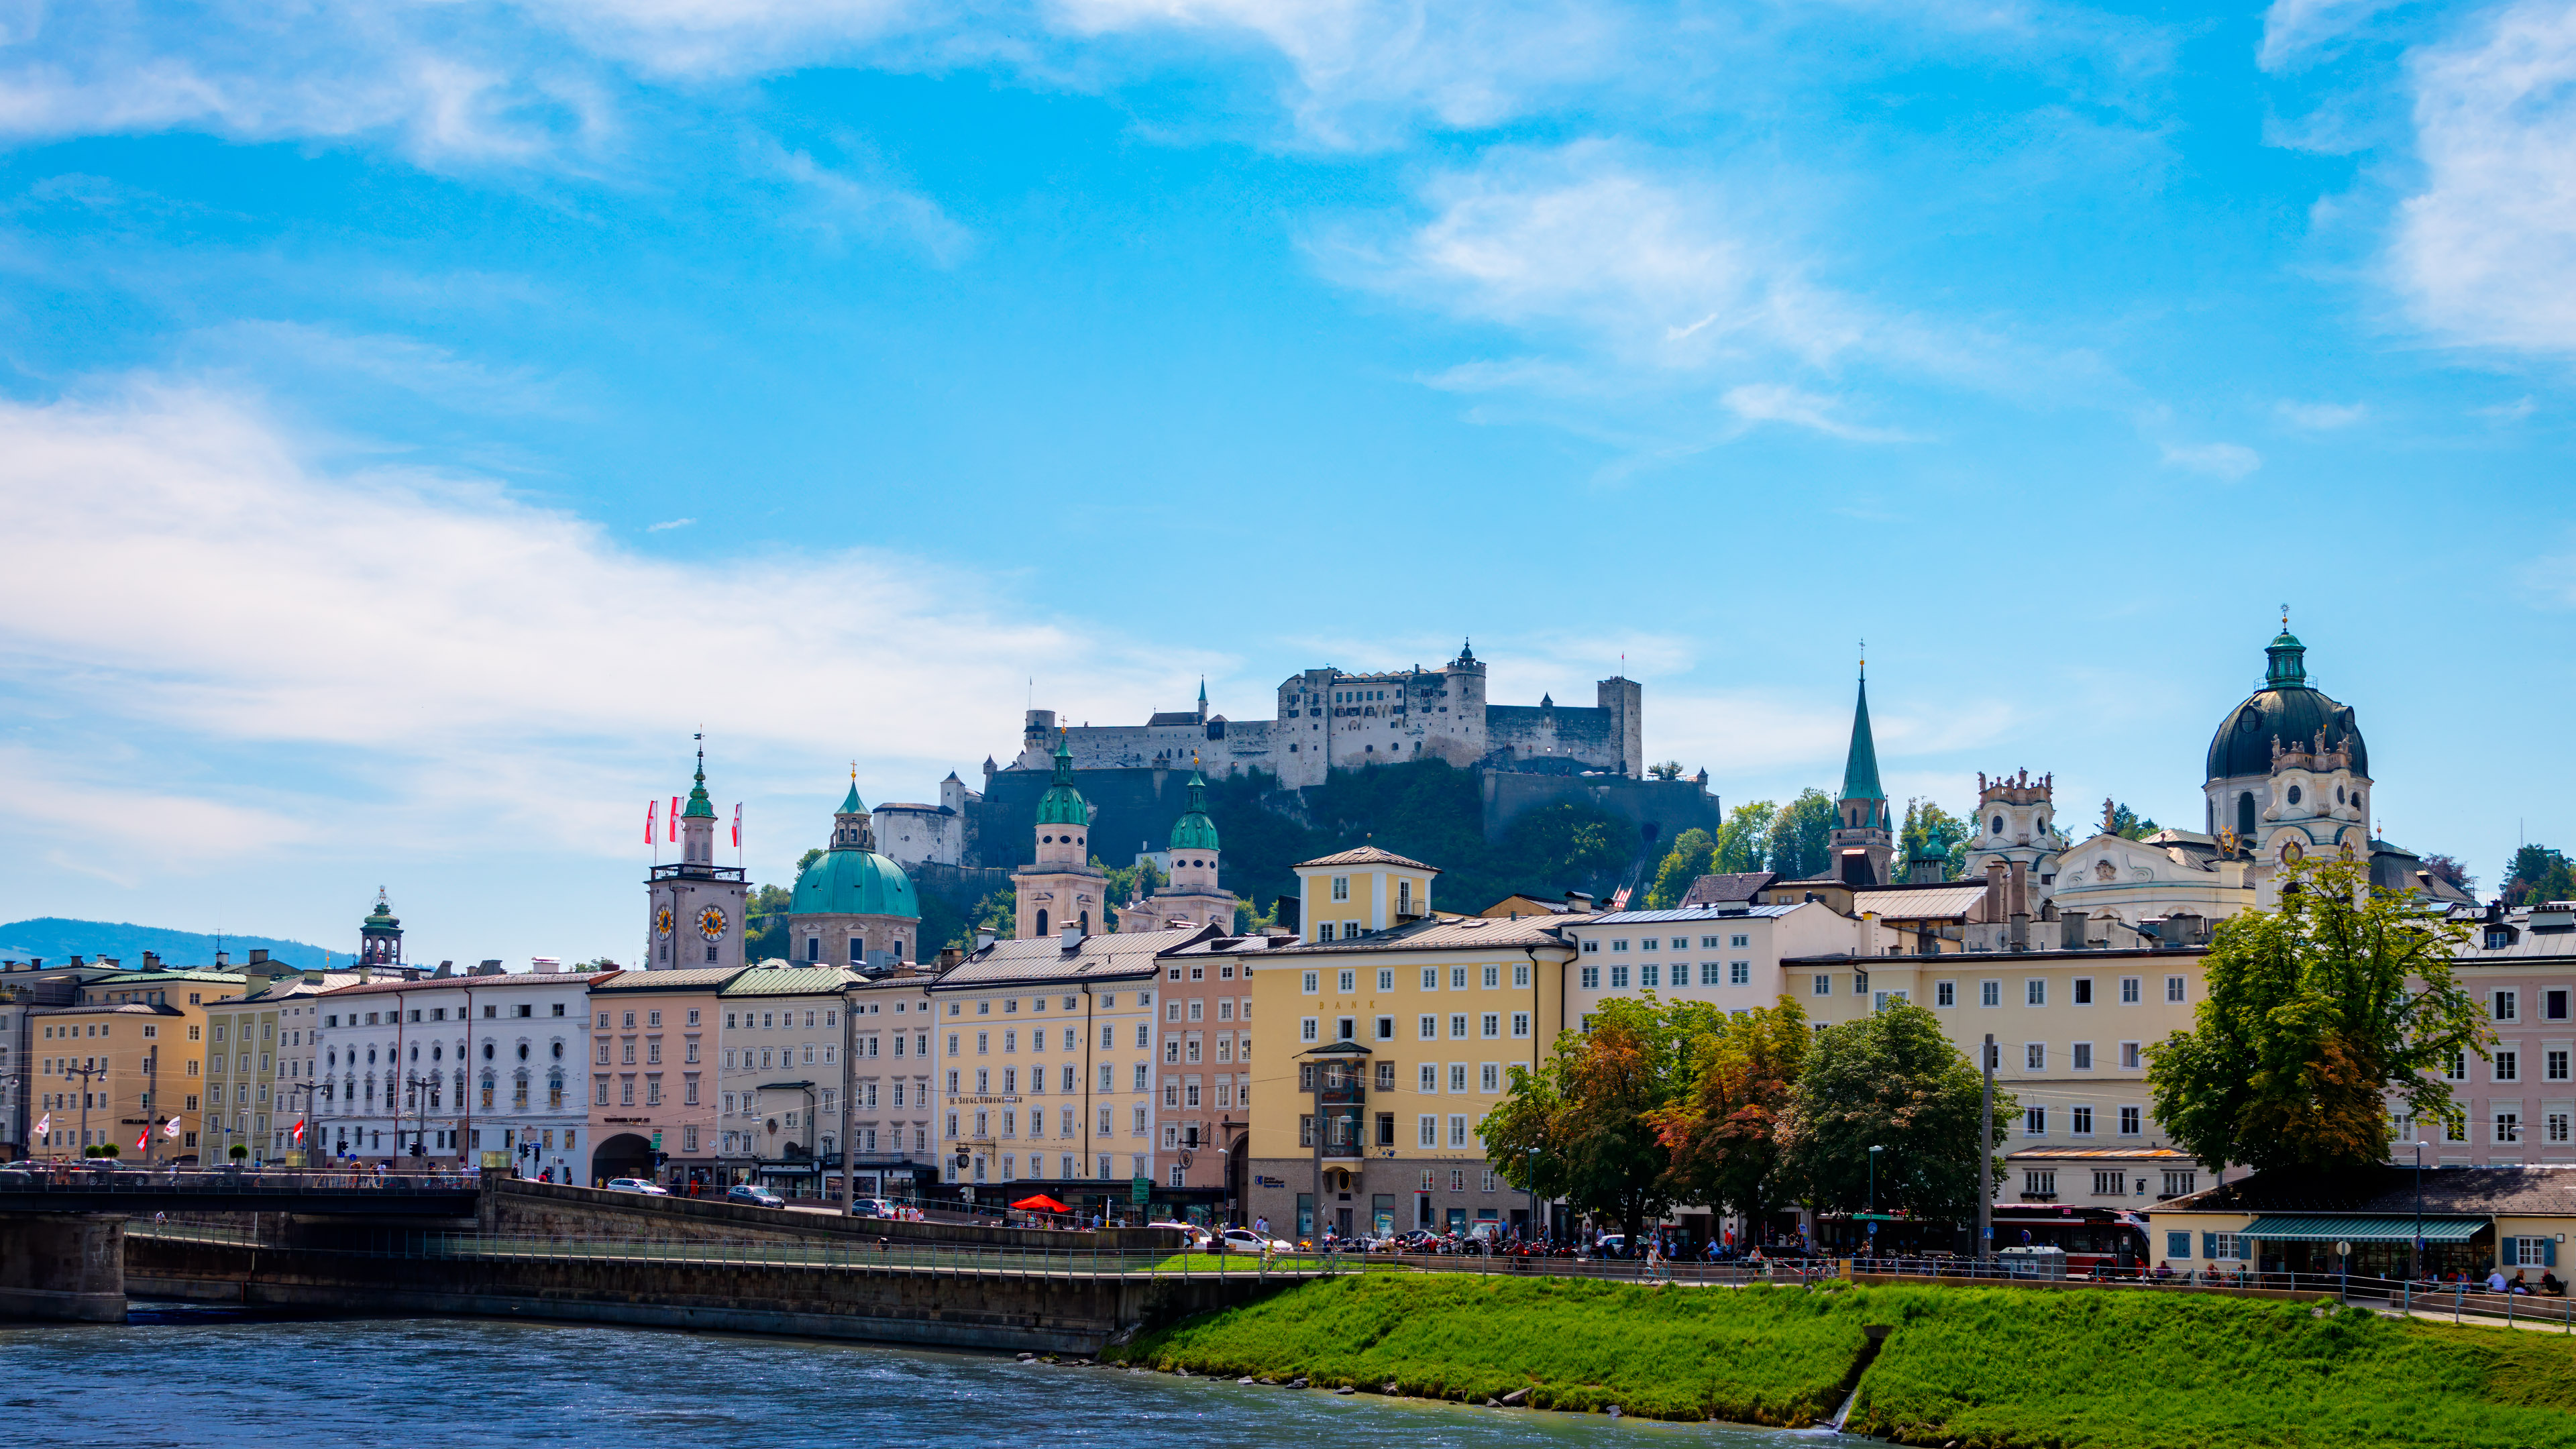 Immerse yourself in the picturesque beauty of Salzburg with our enchanting city view wallpaper, bringing Austrian charm to your device.